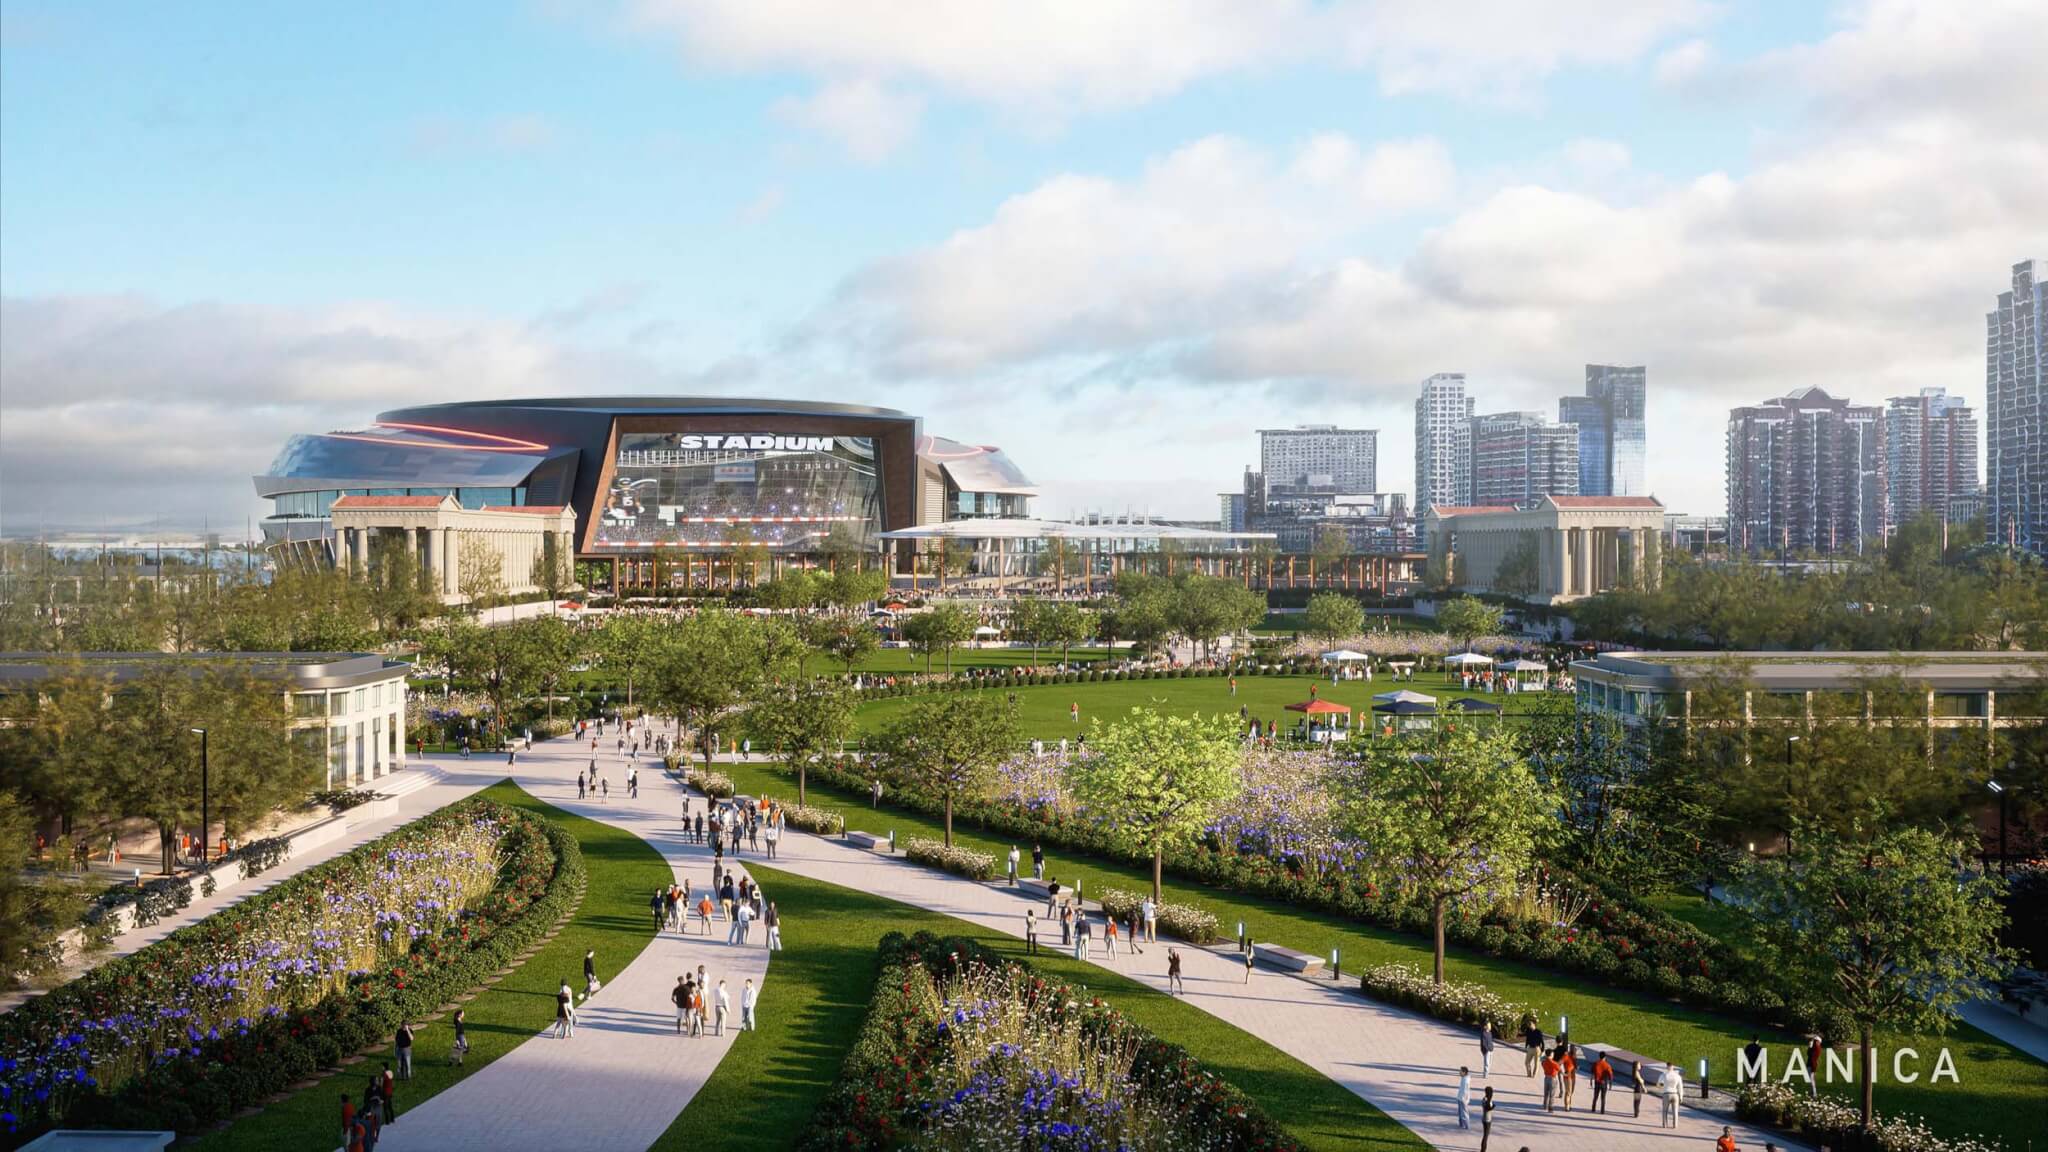 Manica-designed Chicago Bears stadium could unravel policy-forward development in favor of a suburbanesque amusement park